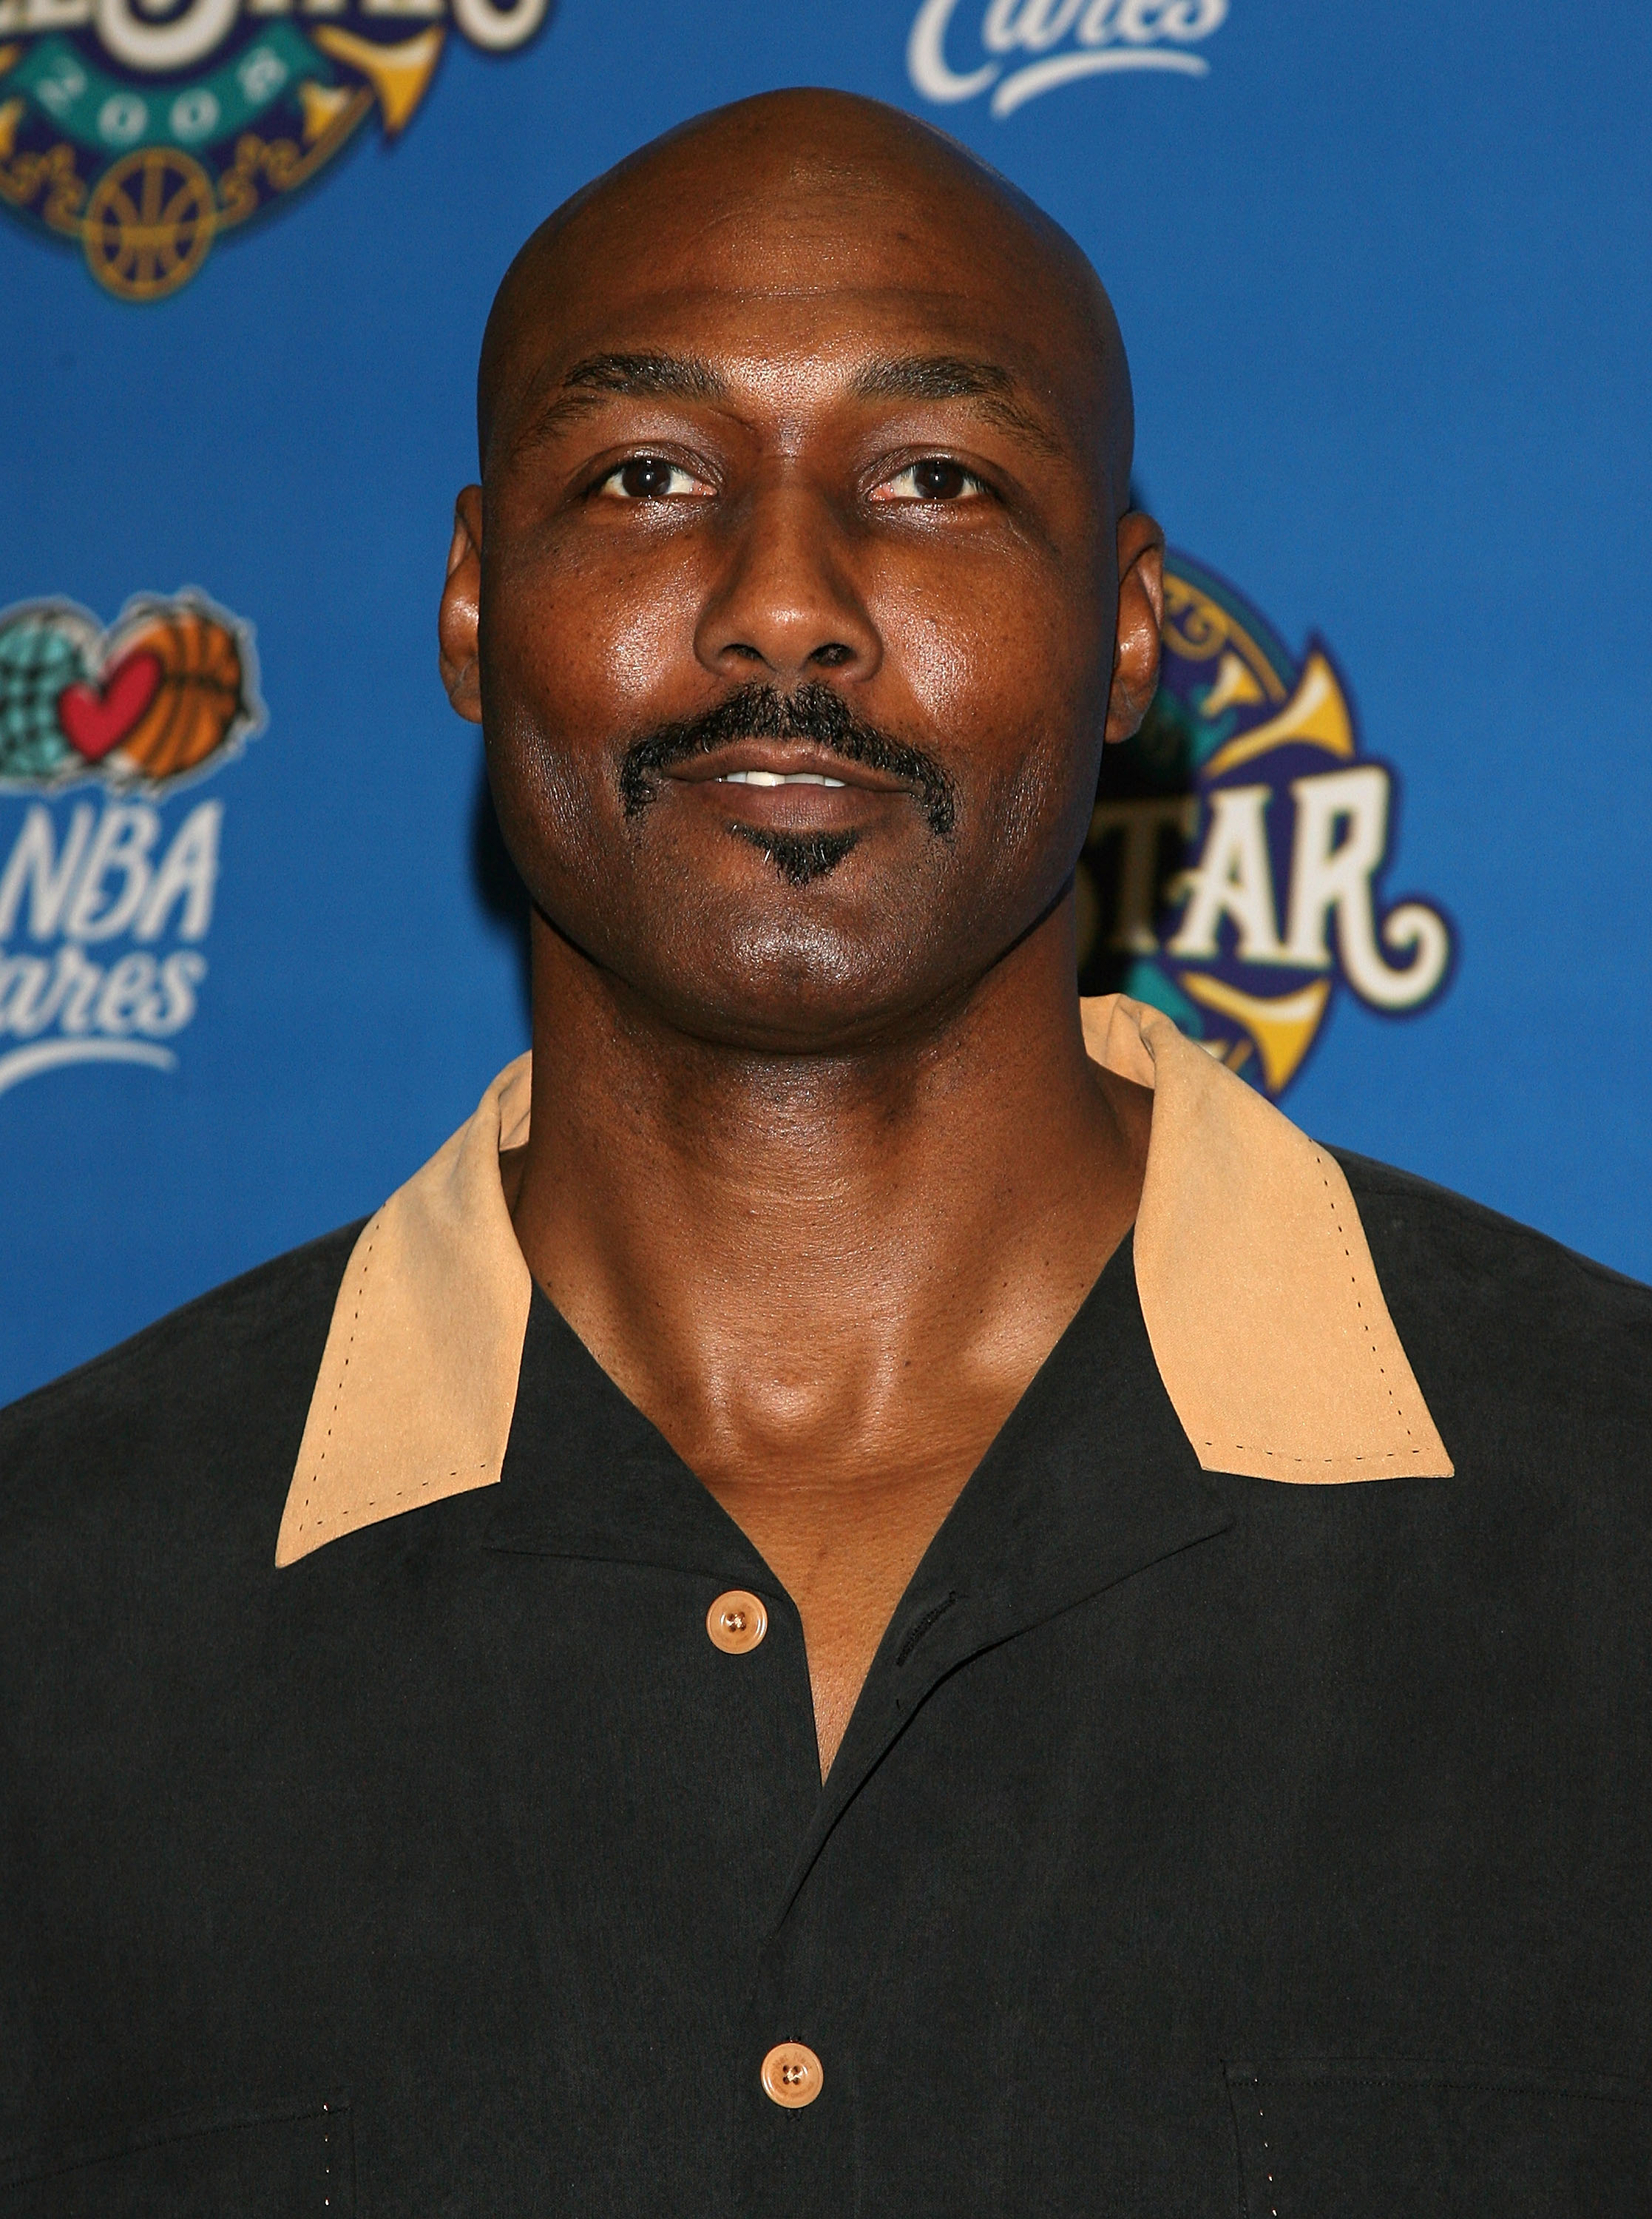 NEW ORLEANS - FEBRUARY 17:  Basketball player Karl Malone arrives at the 57th NBA All-Star Game, part of 2008 NBA All-Star Weekend at the New Orleans Arena on February 17, 2008 in New Orleans, Louisiana.  NOTE TO USER: User expressly acknowledges and agre